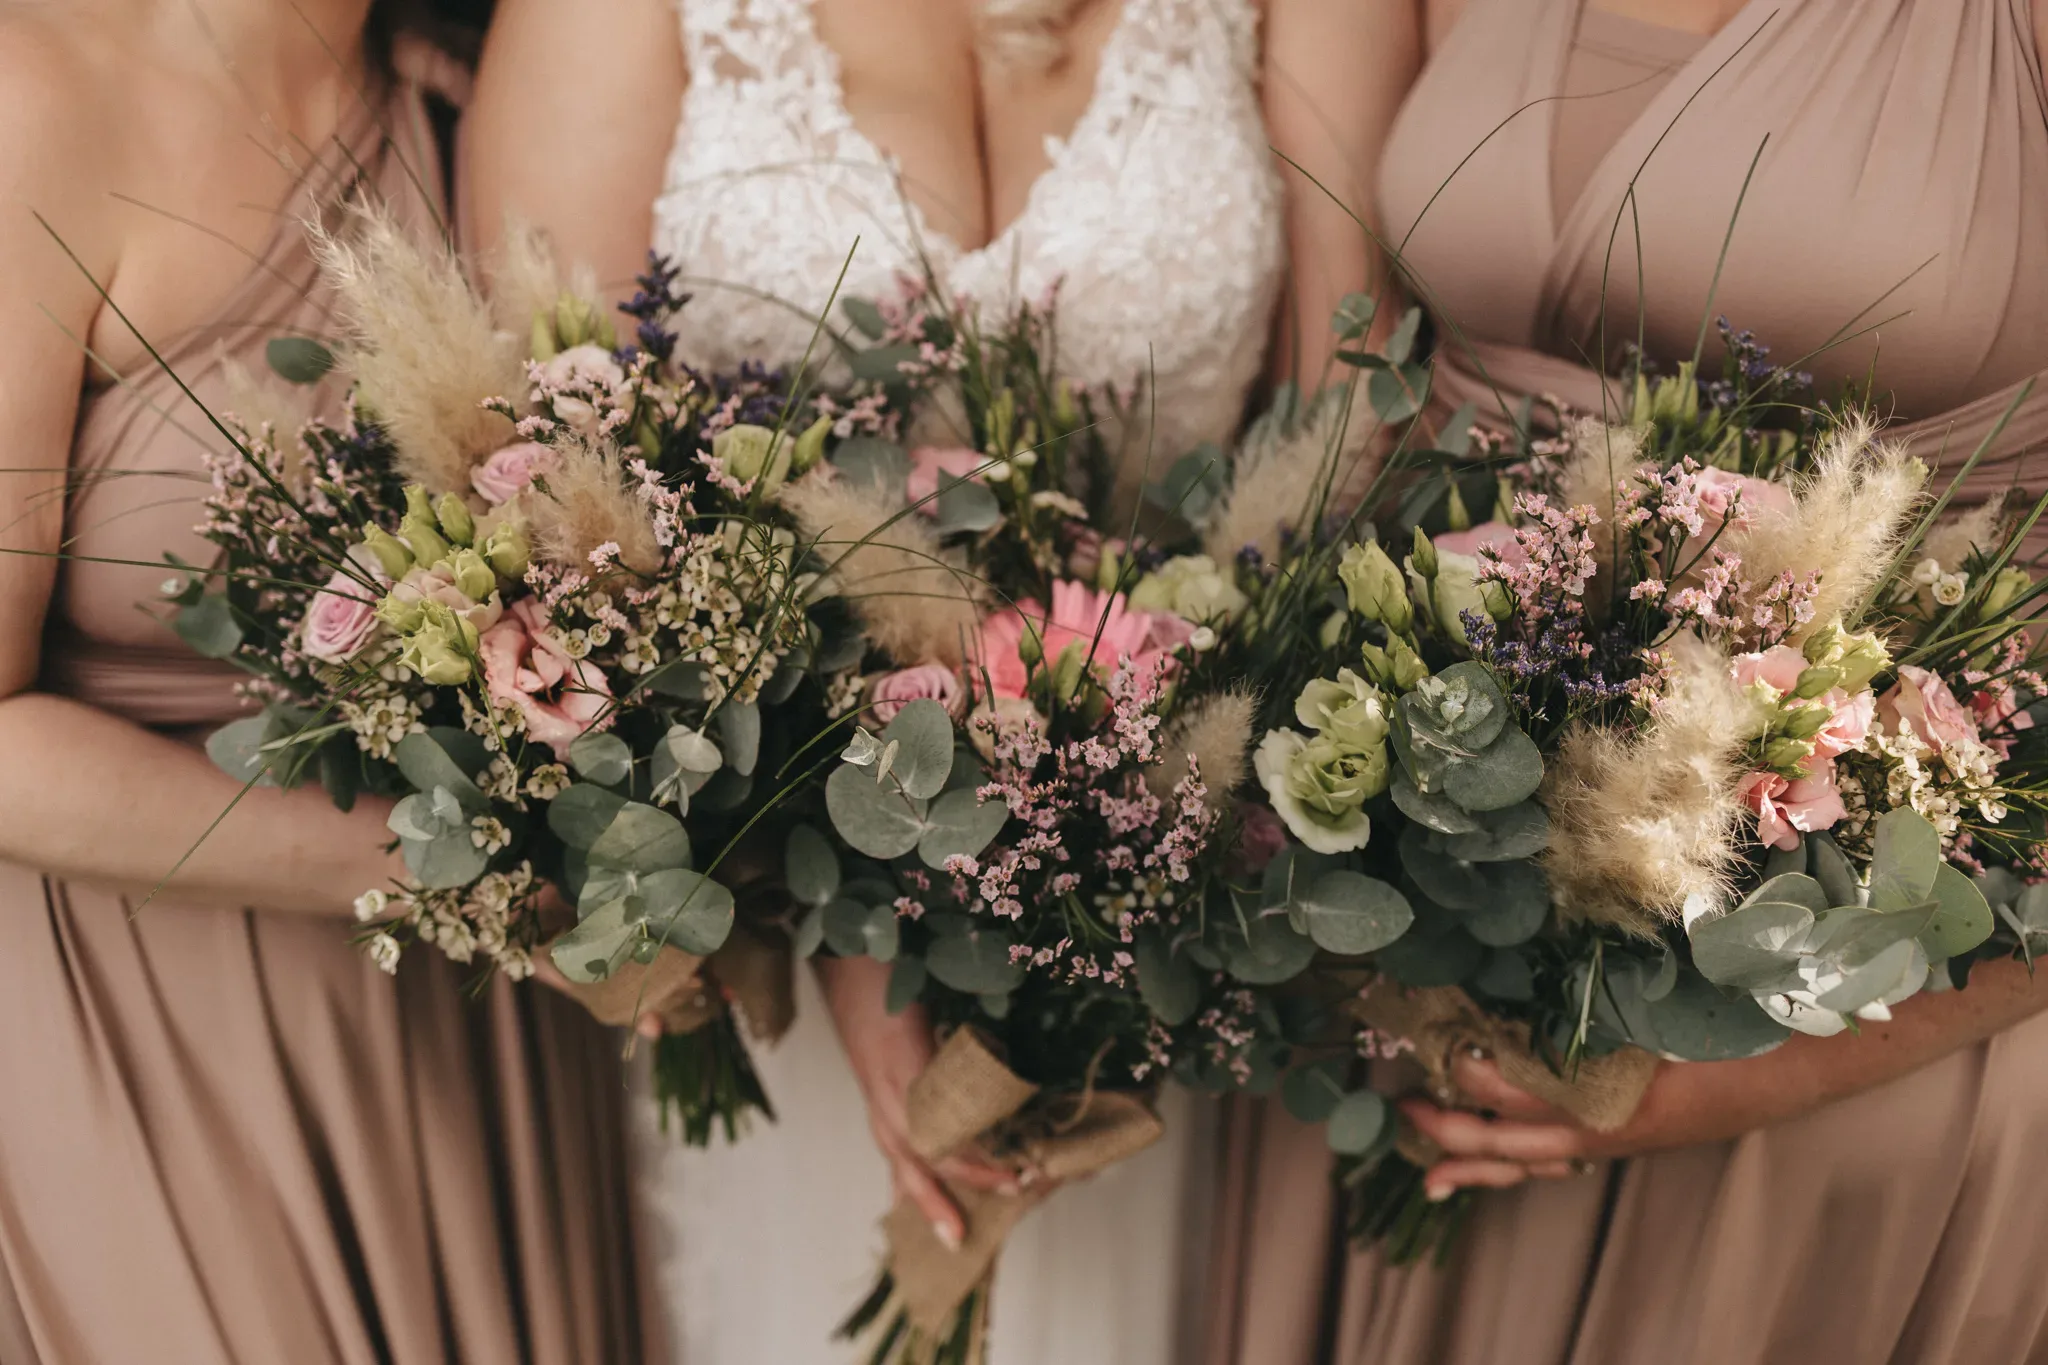 Three women in elegant dresses holding large, rustic bouquets with a mix of pink flowers and greenery, focusing on the bouquets in front of their light-colored dresses.